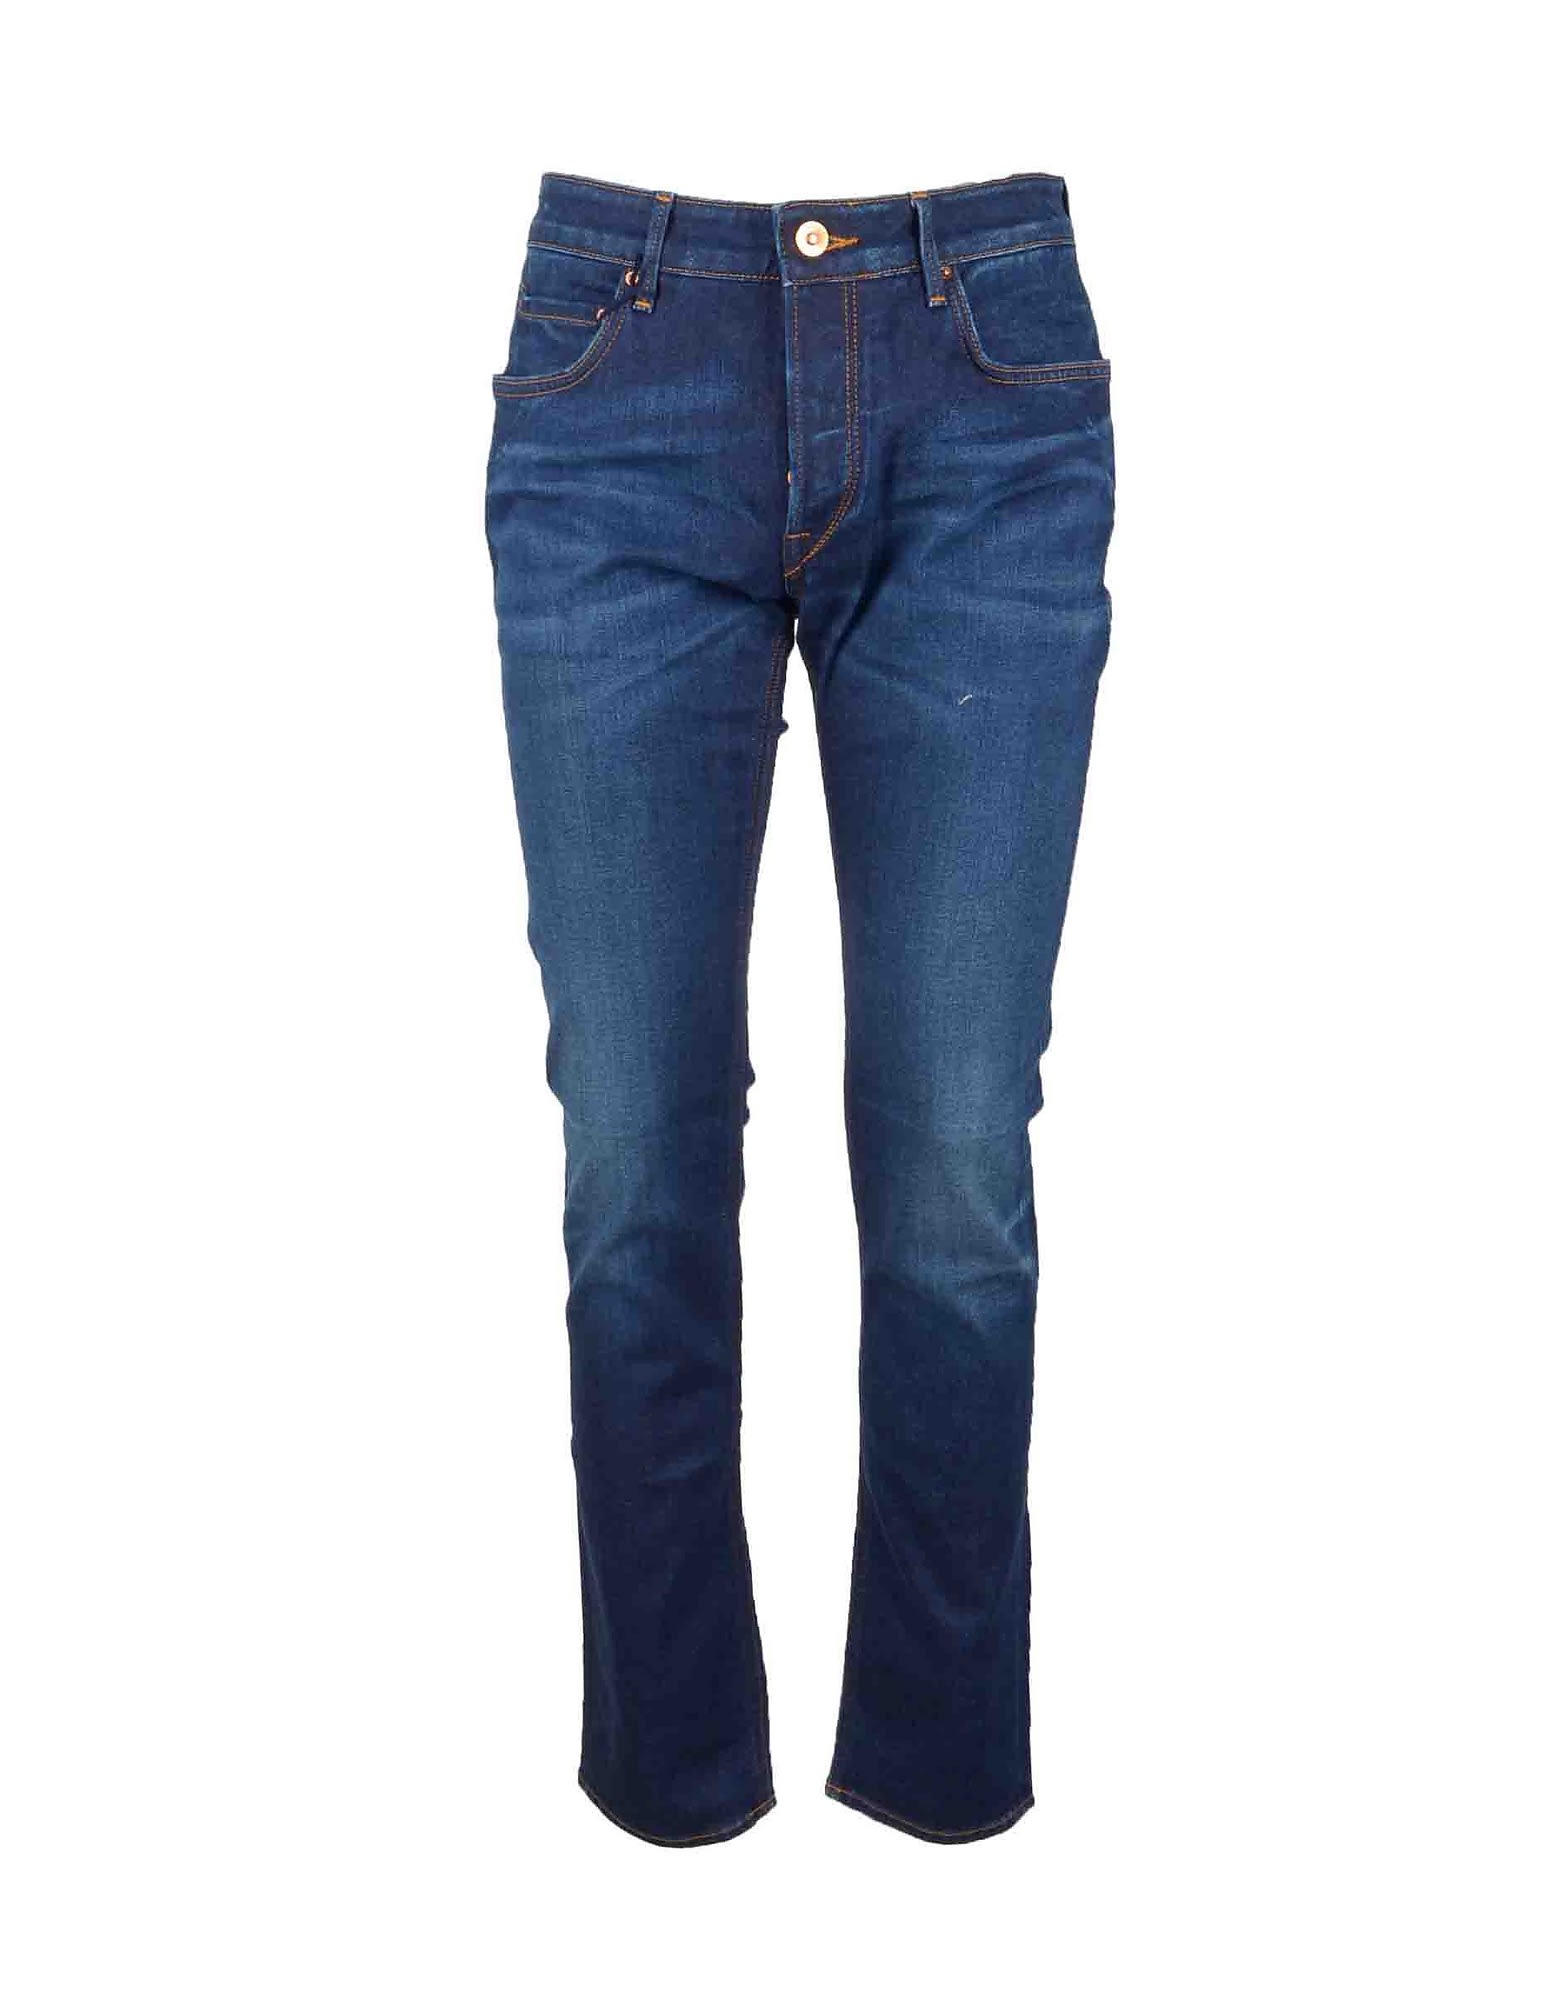 Hand Picked Mens Blue Jeans